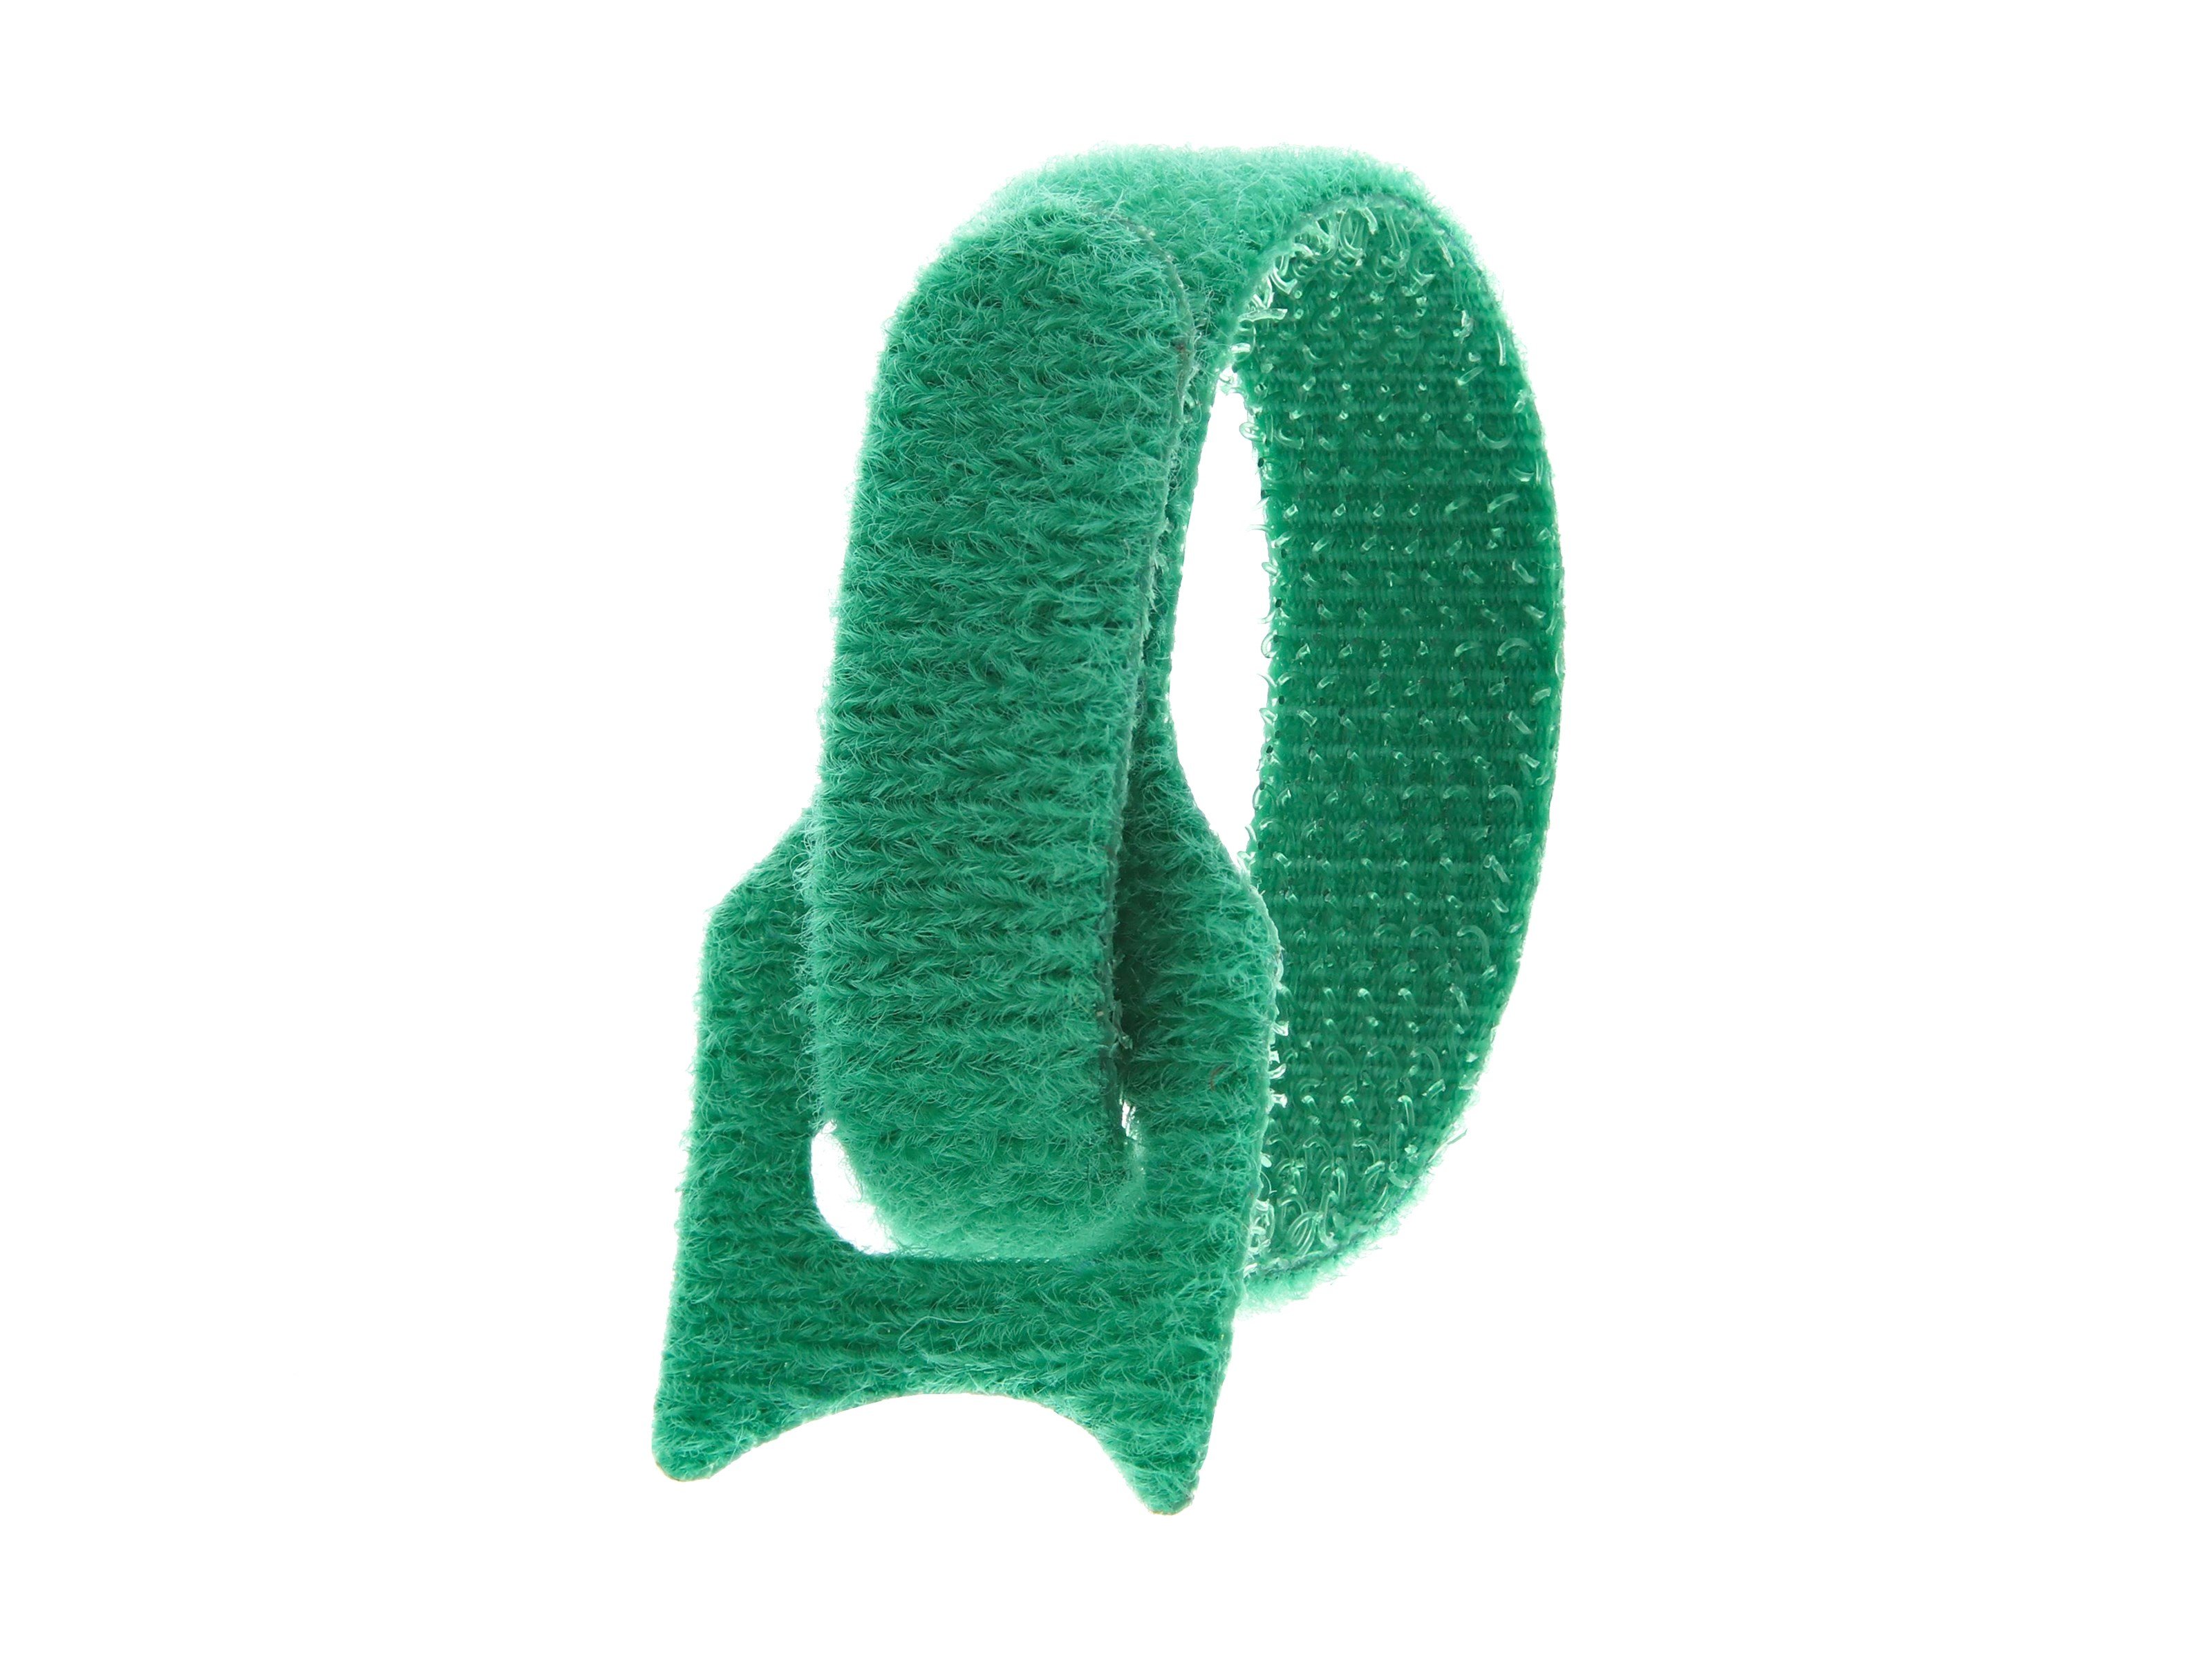 6 Inch Green Reuseable Tie Wrap - 50 Pack - Secure™ Cable Ties